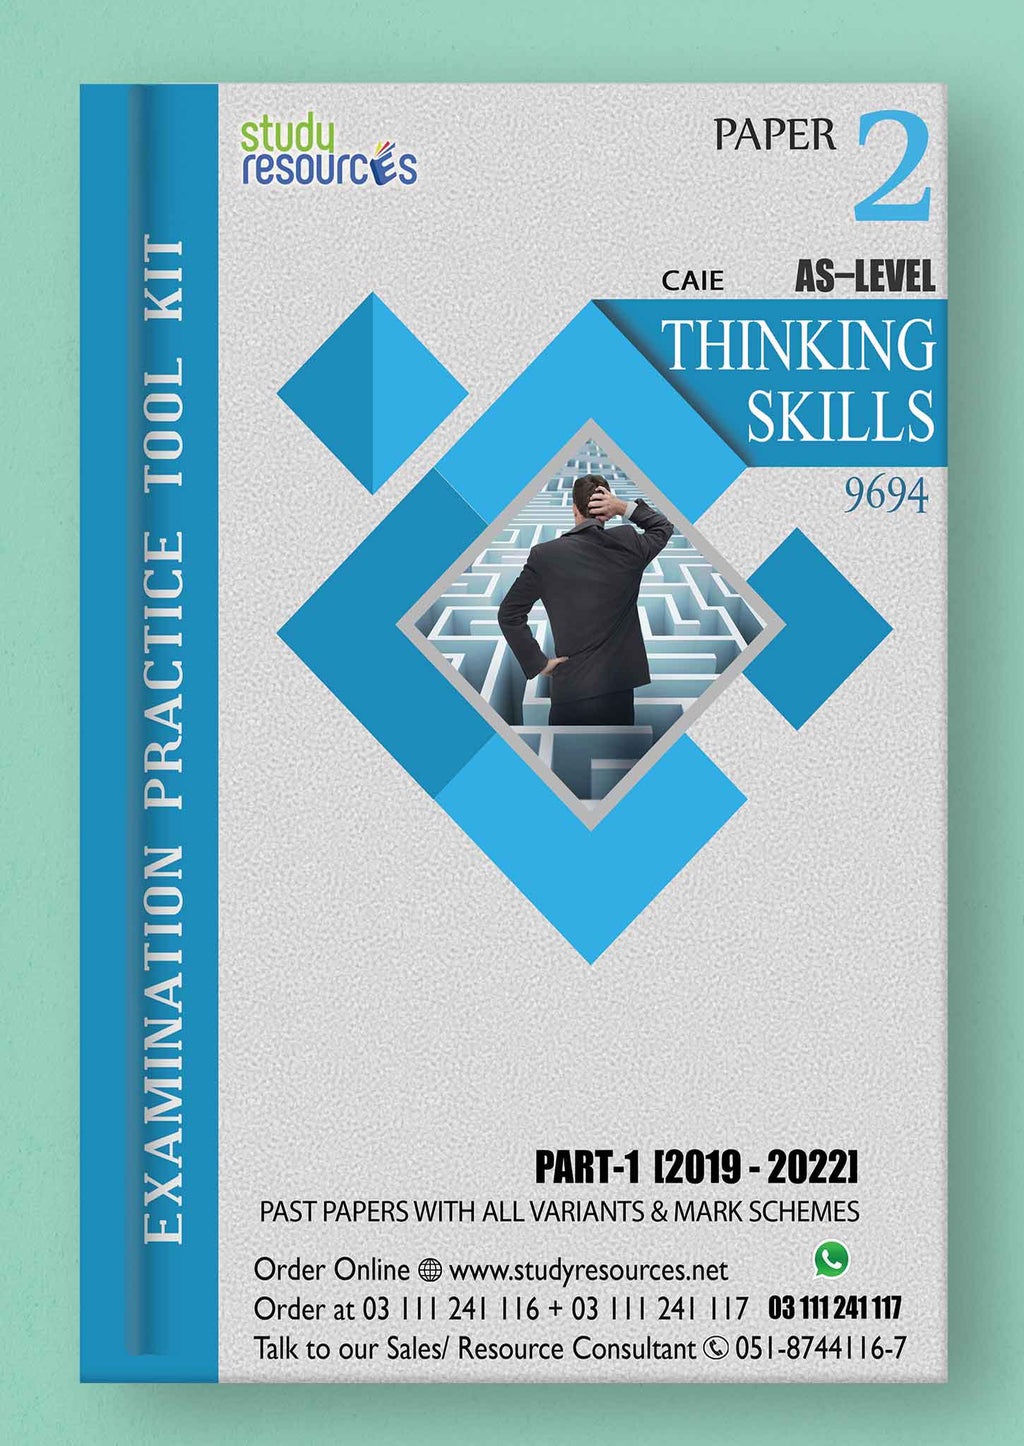 Cambridge AS-Level Thinking Skills (9694) P-2 Past Papers Part-1 (2019-2022) - Study Resources